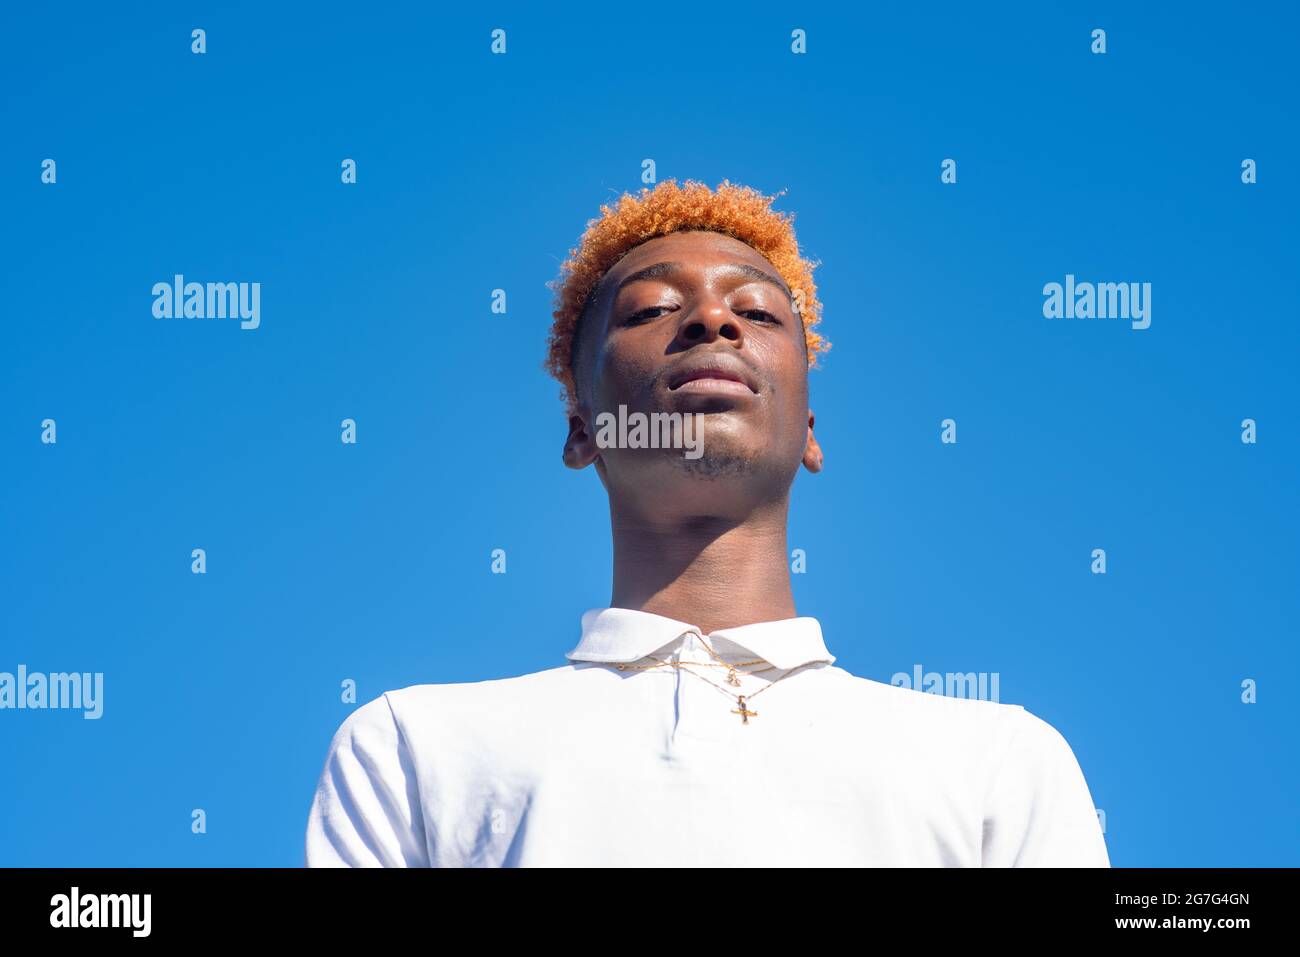 Young man with bright colored hair shot up close Stock Photo